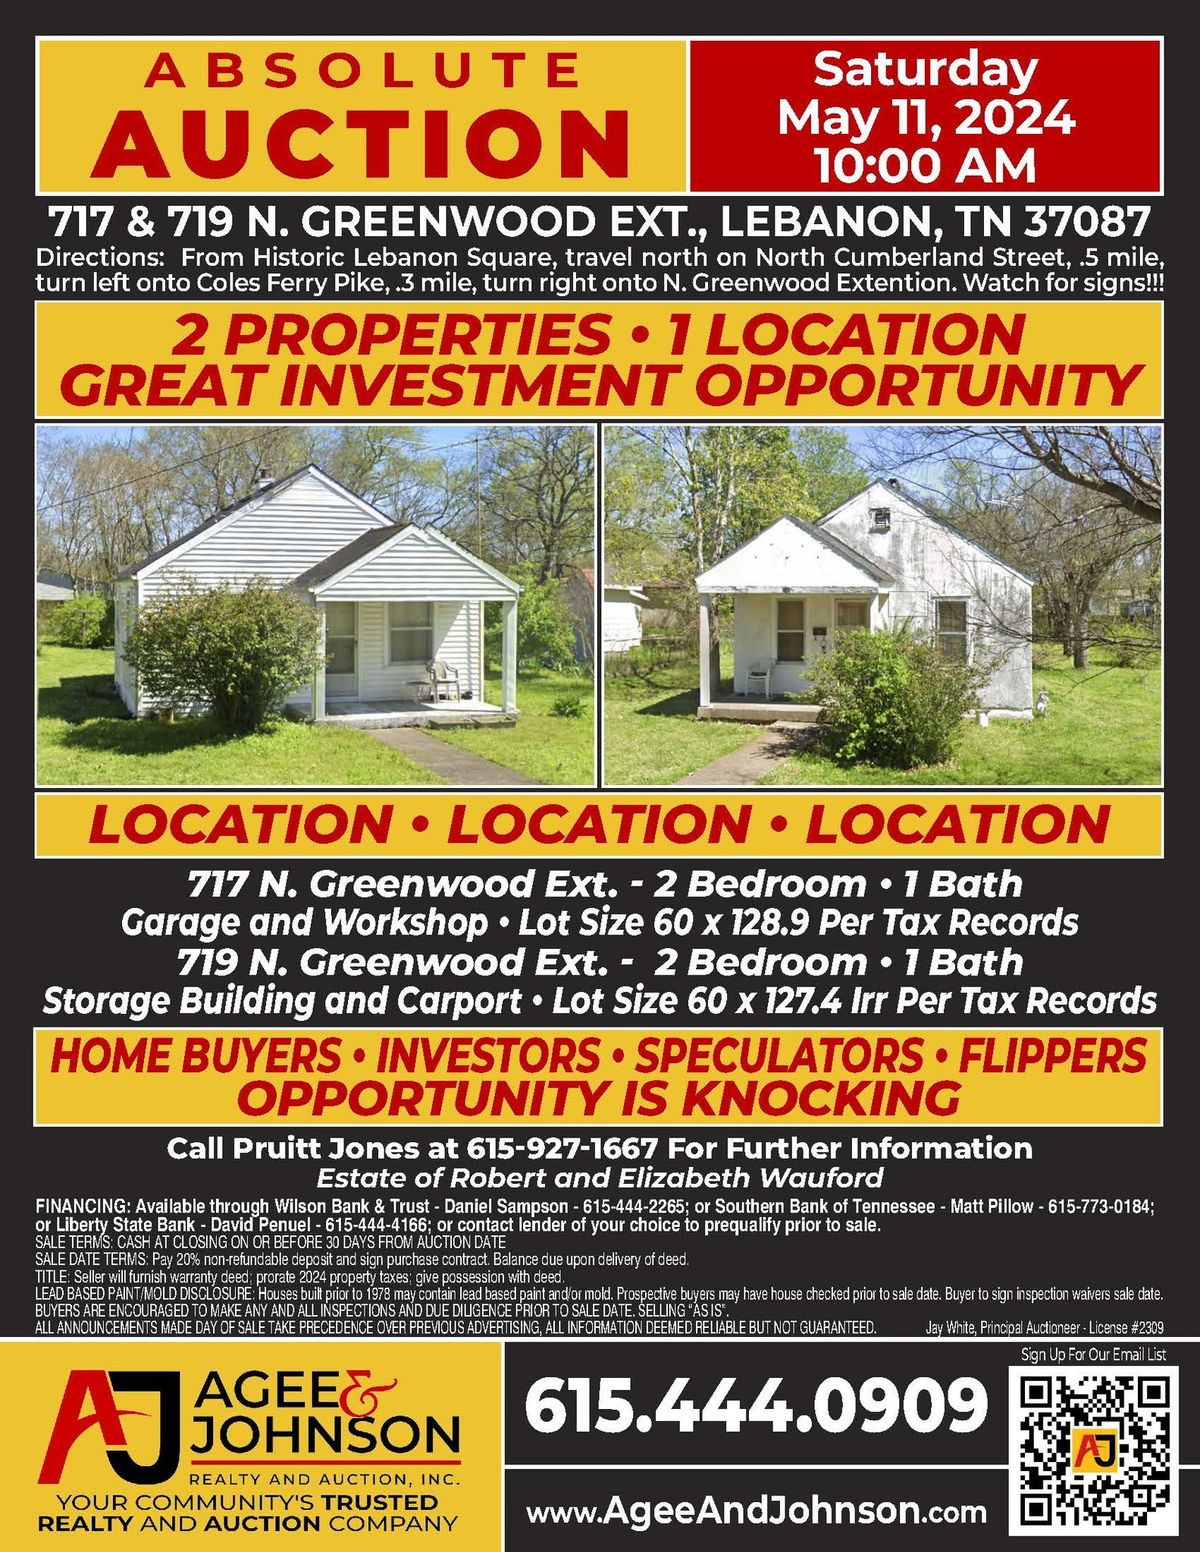 717 & 719 N Greenwood Ext Absolute Auction